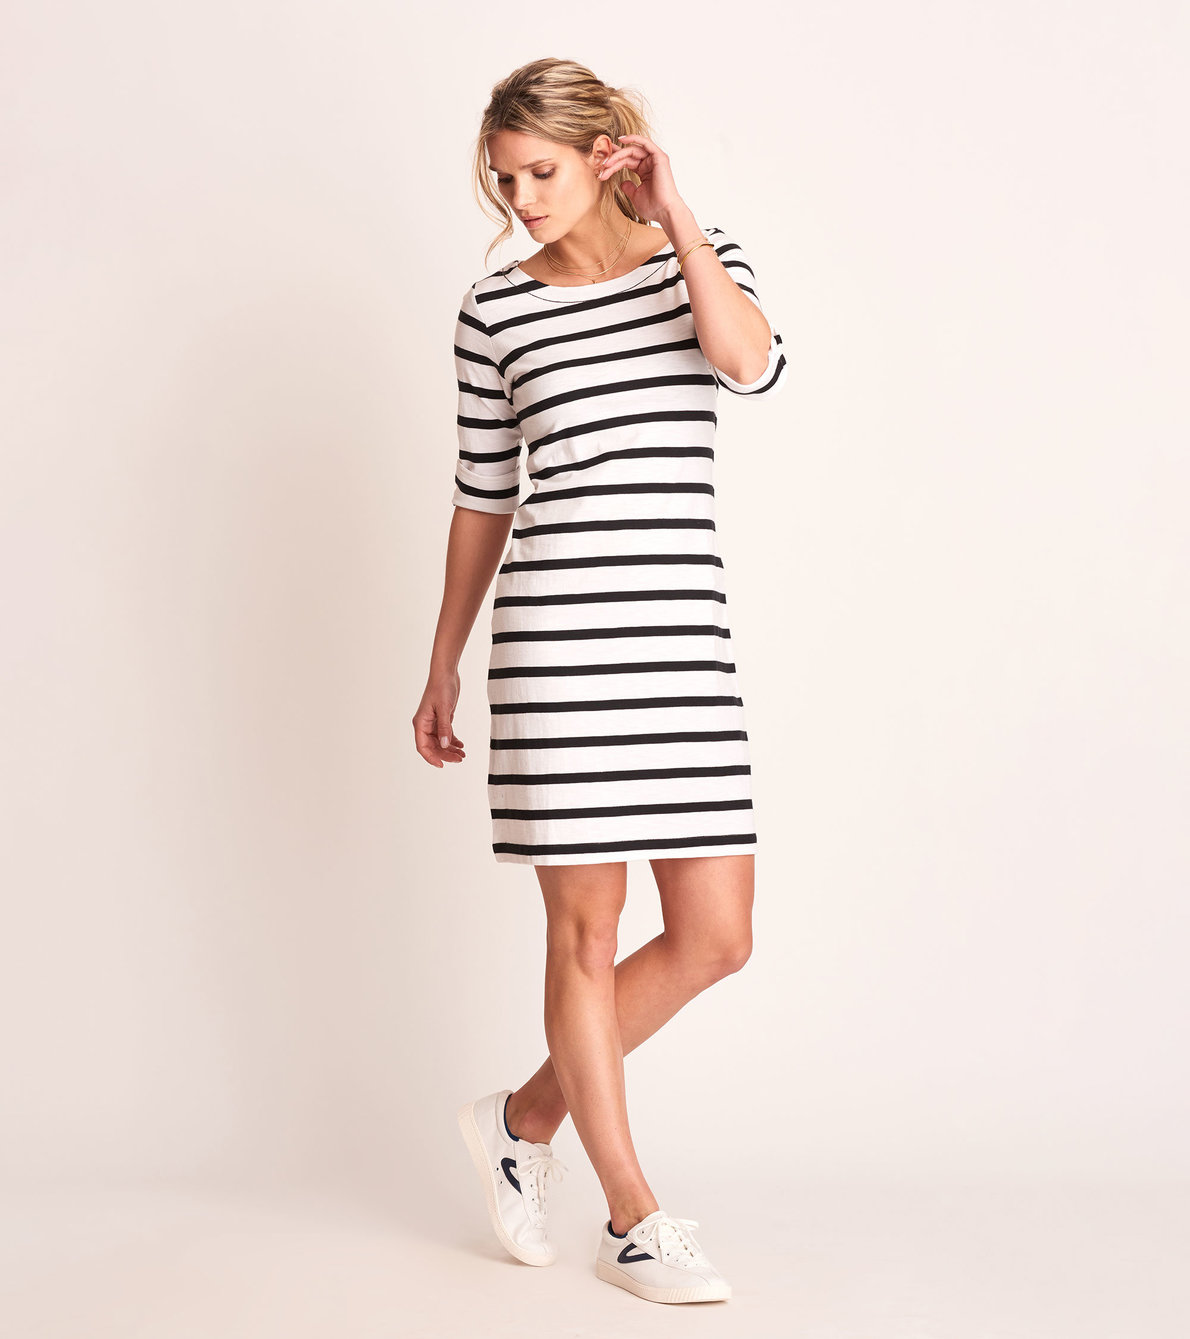 View larger image of Lucy Dress - Black Stripes